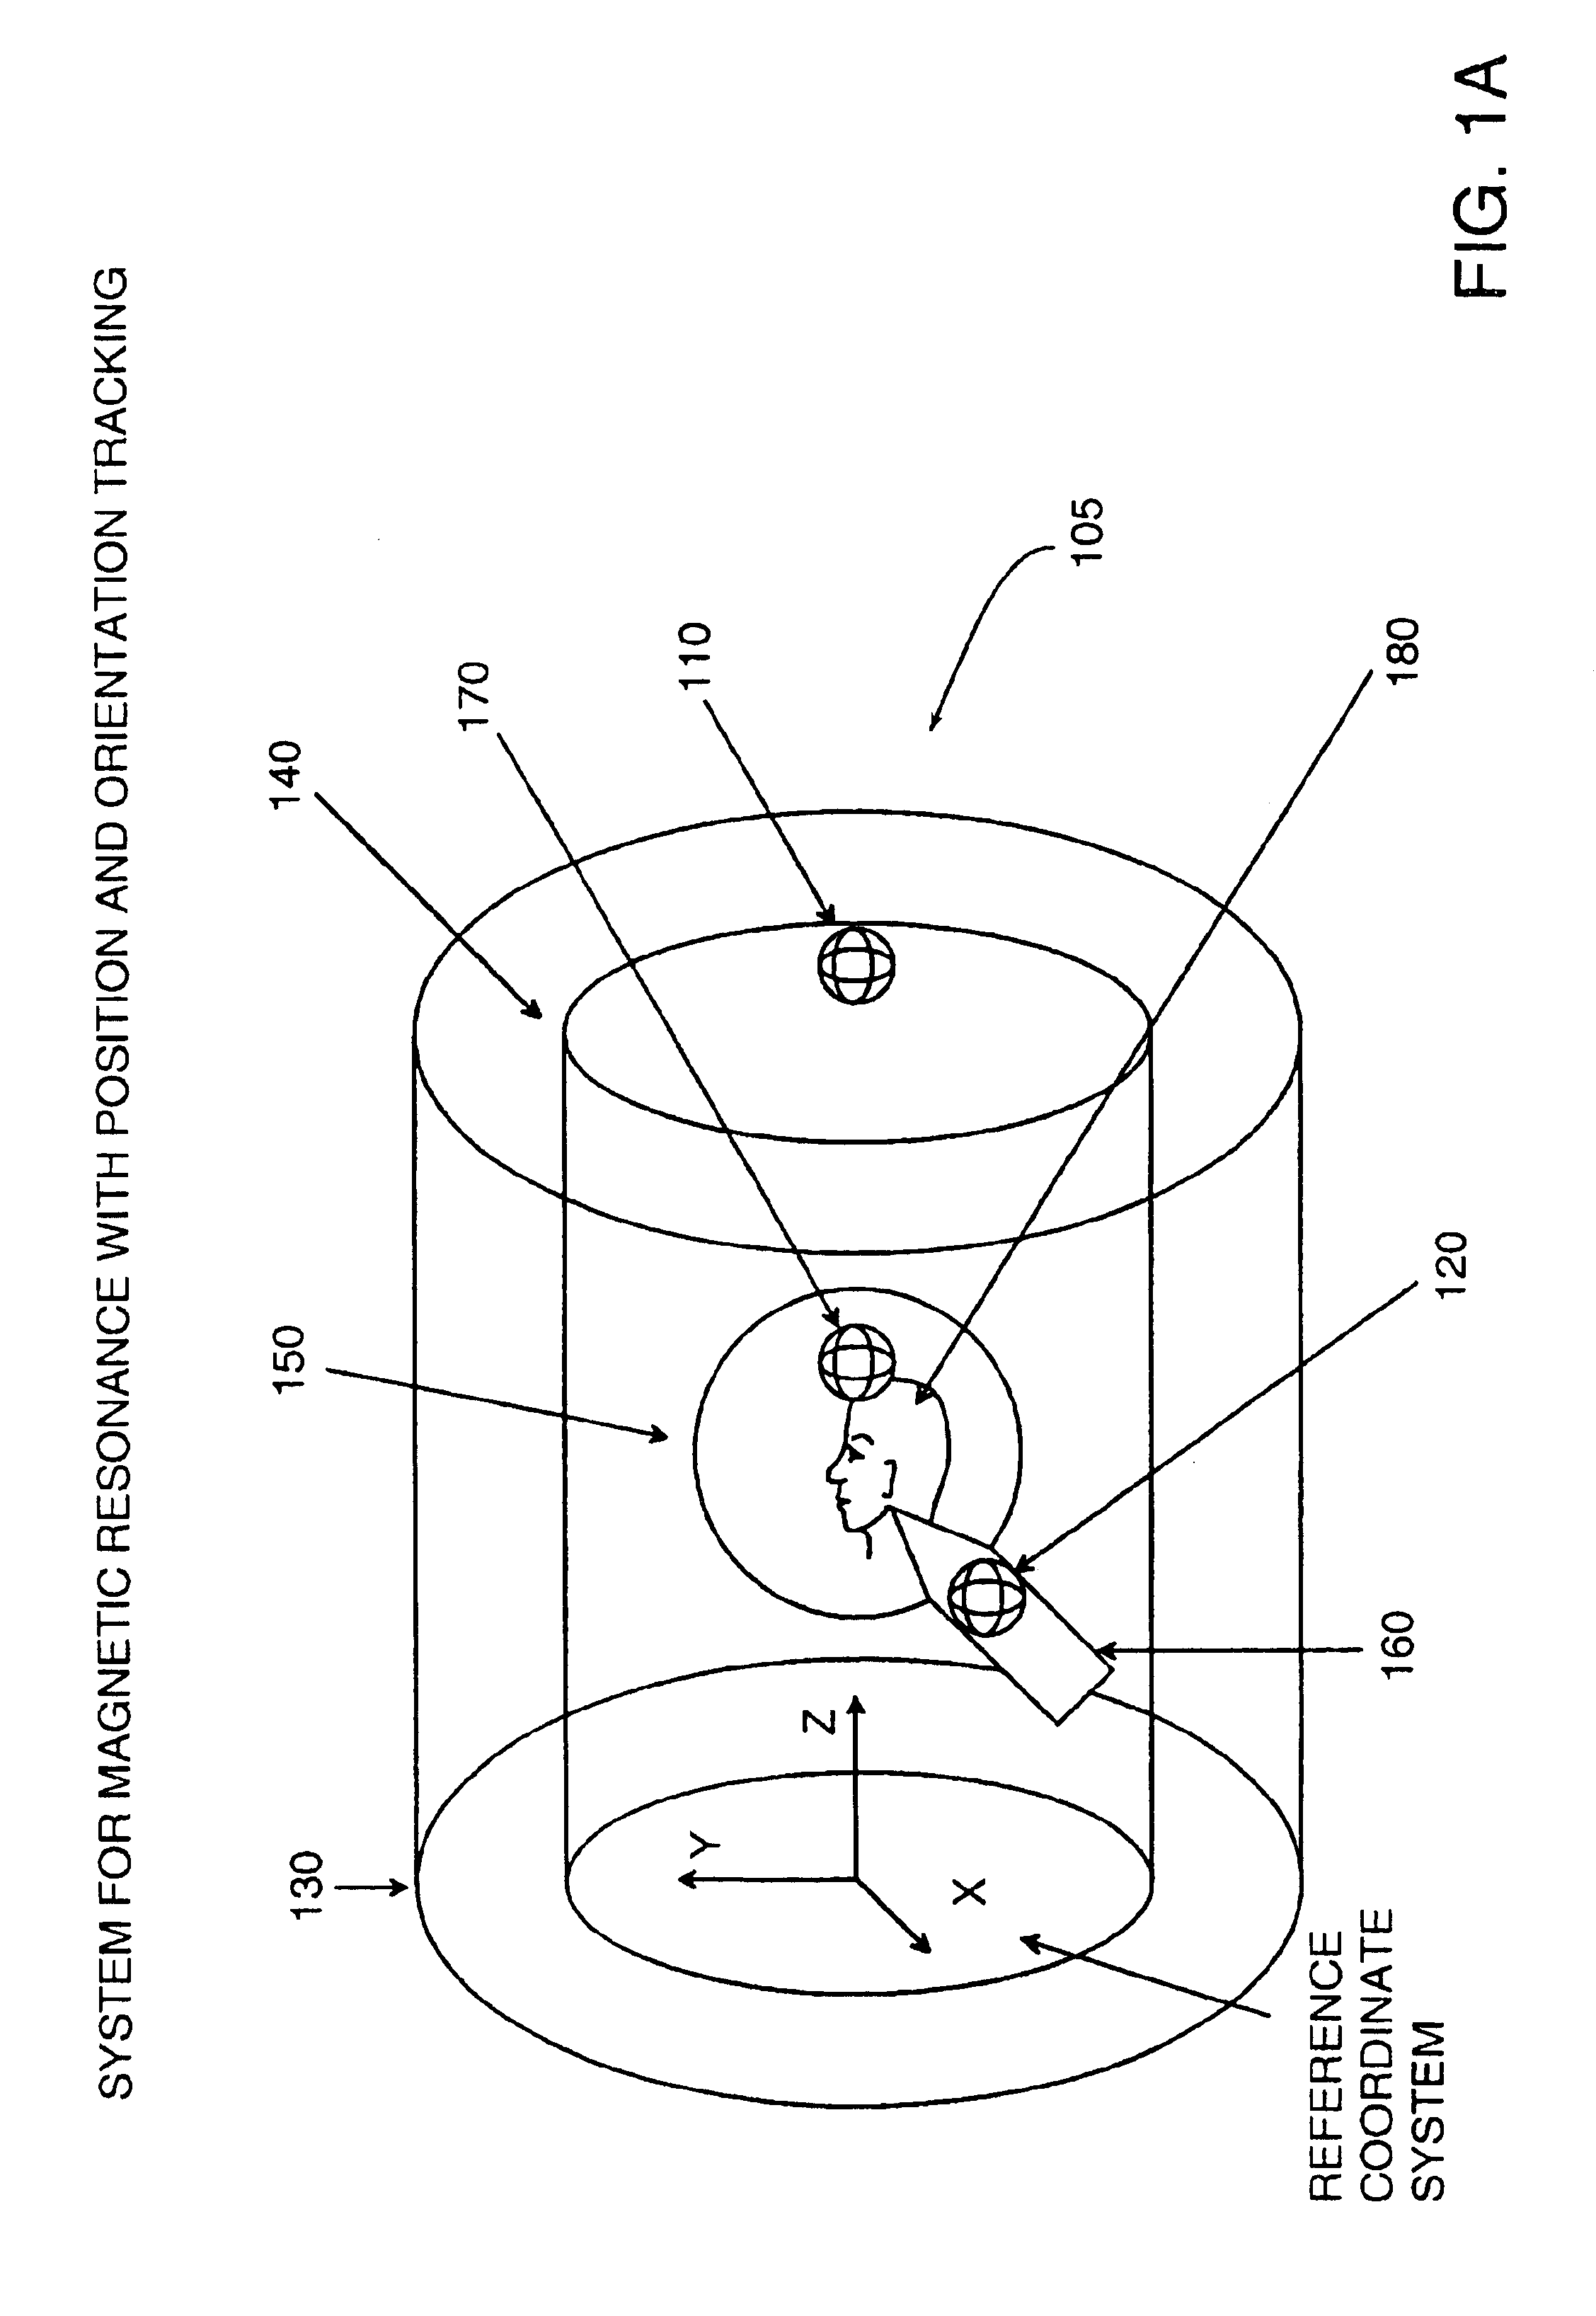 Magnetic resonance scanner with electromagnetic position and orientation tracking device